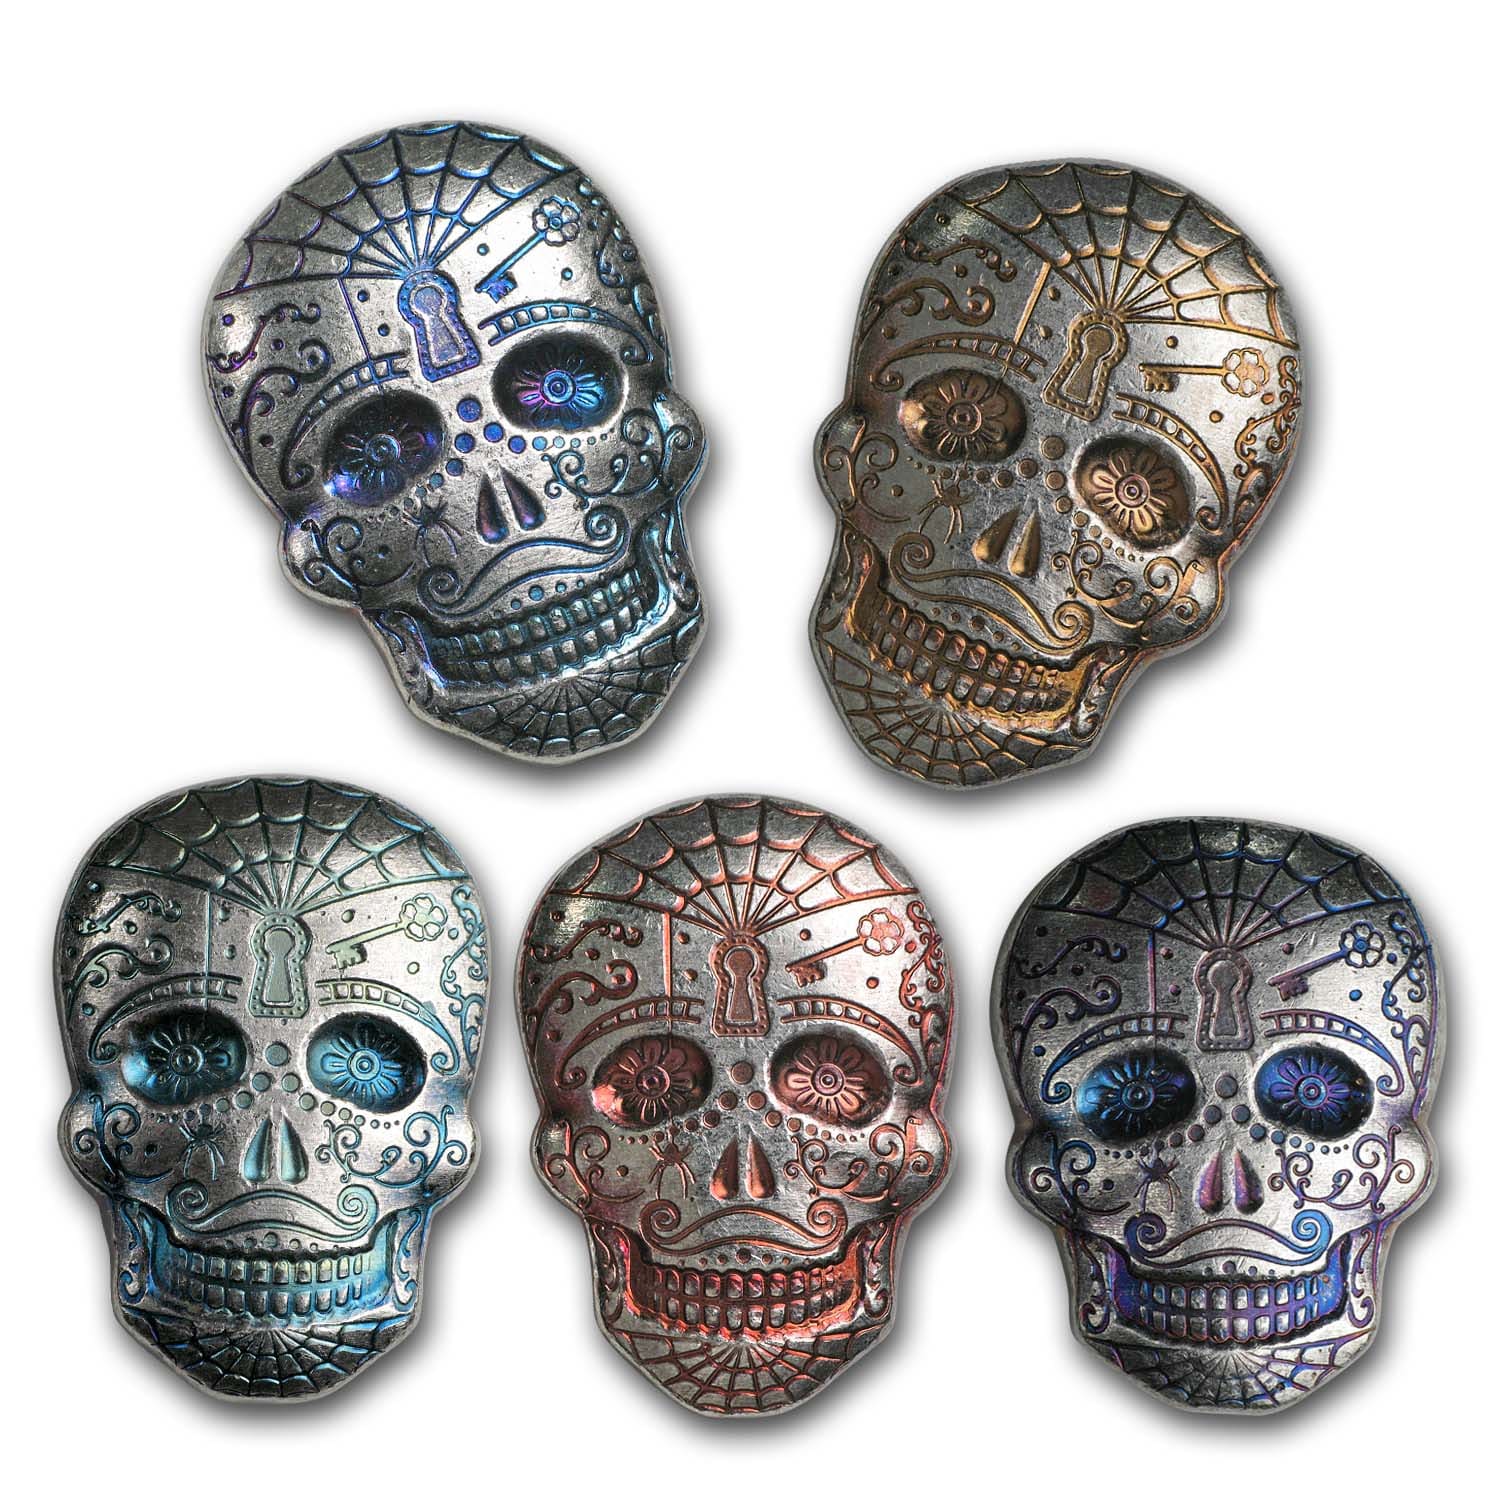 about 9.1 oz Made in the USA Brass Aluminum Alloy Hand Poured Design Skull